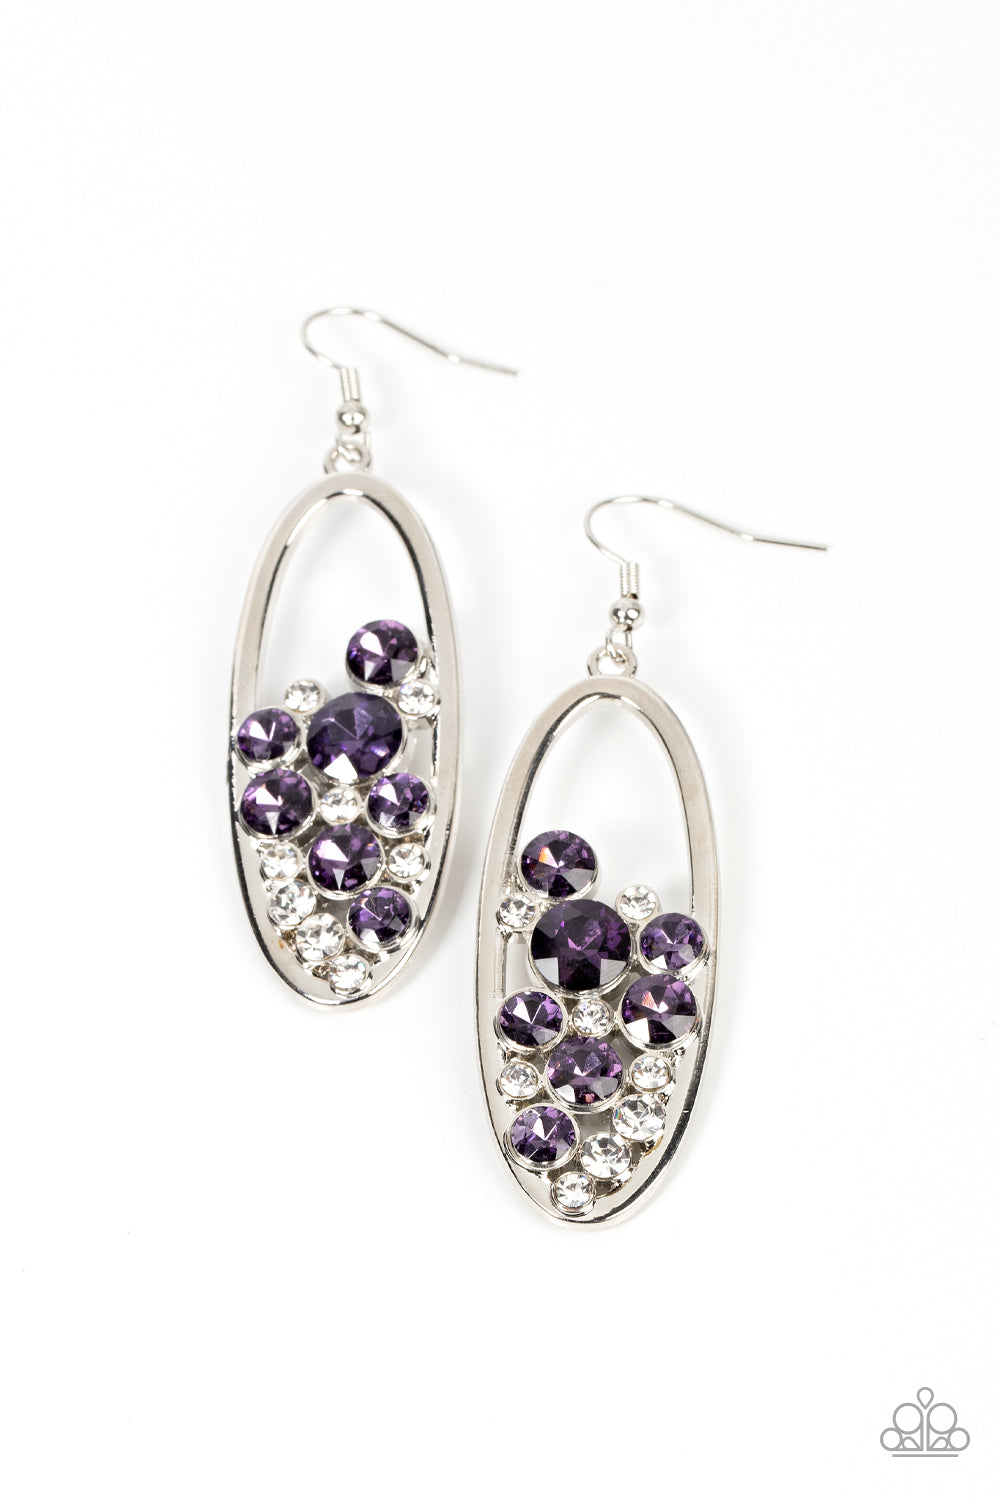 Prismatic Poker Face Purple Earring - Paparazzi Accessories  Effervescent stacks of sparkly white and purple rhinestones bubble up inside a simple silver oval frame creating a prismatically stunning lure. Earring attaches to a standard fishhook fitting.  Sold as one pair of earrings.